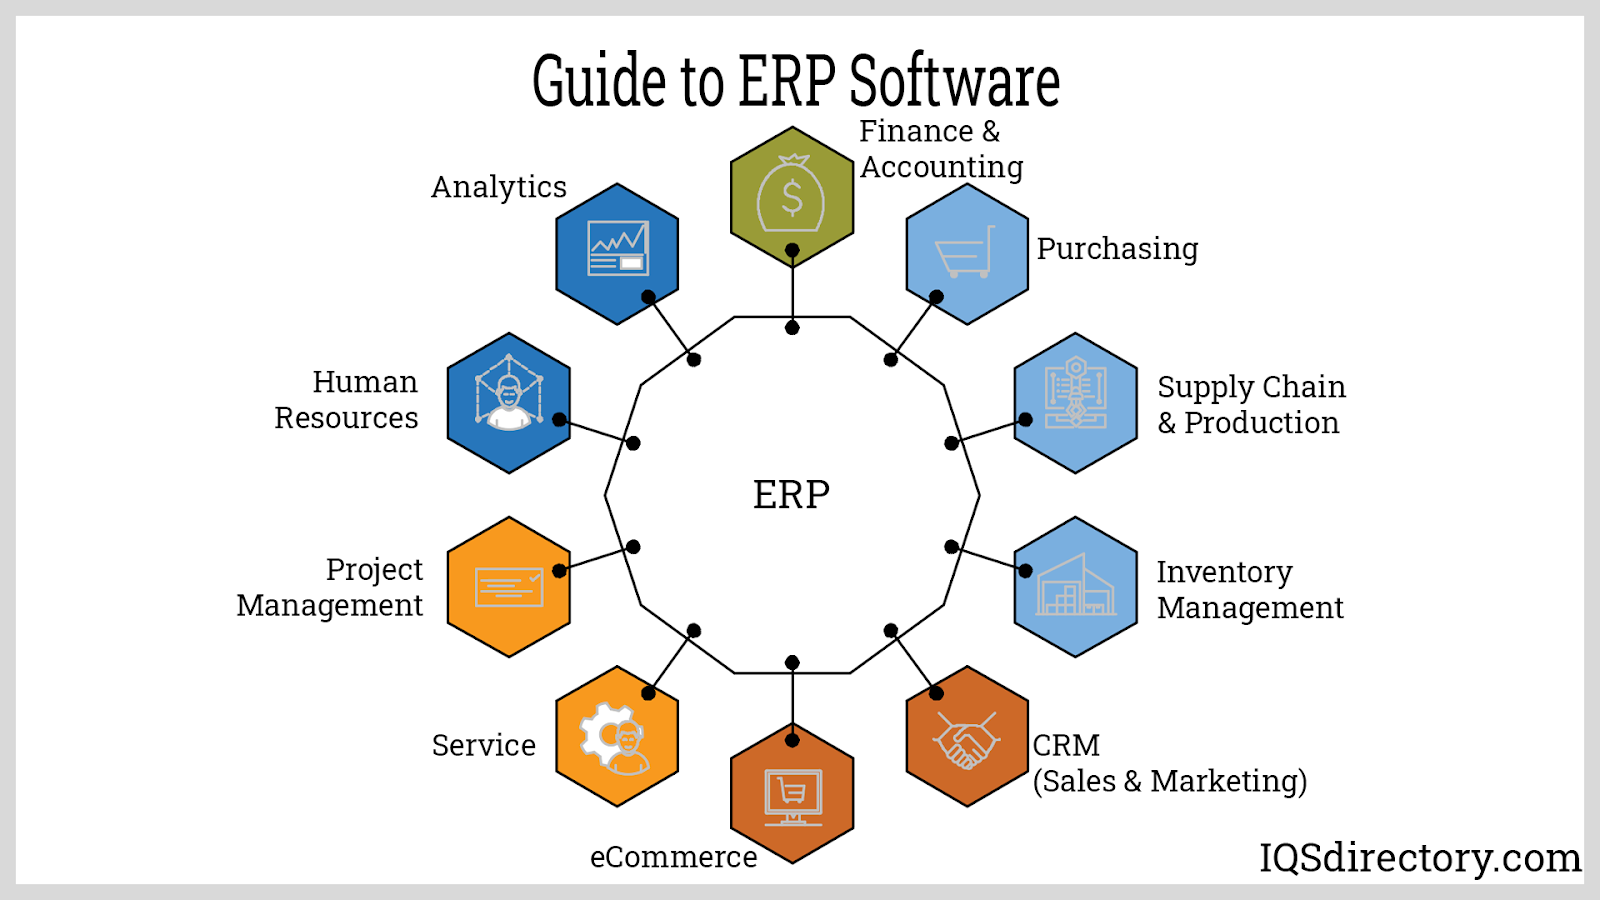 Guide to ERP Software